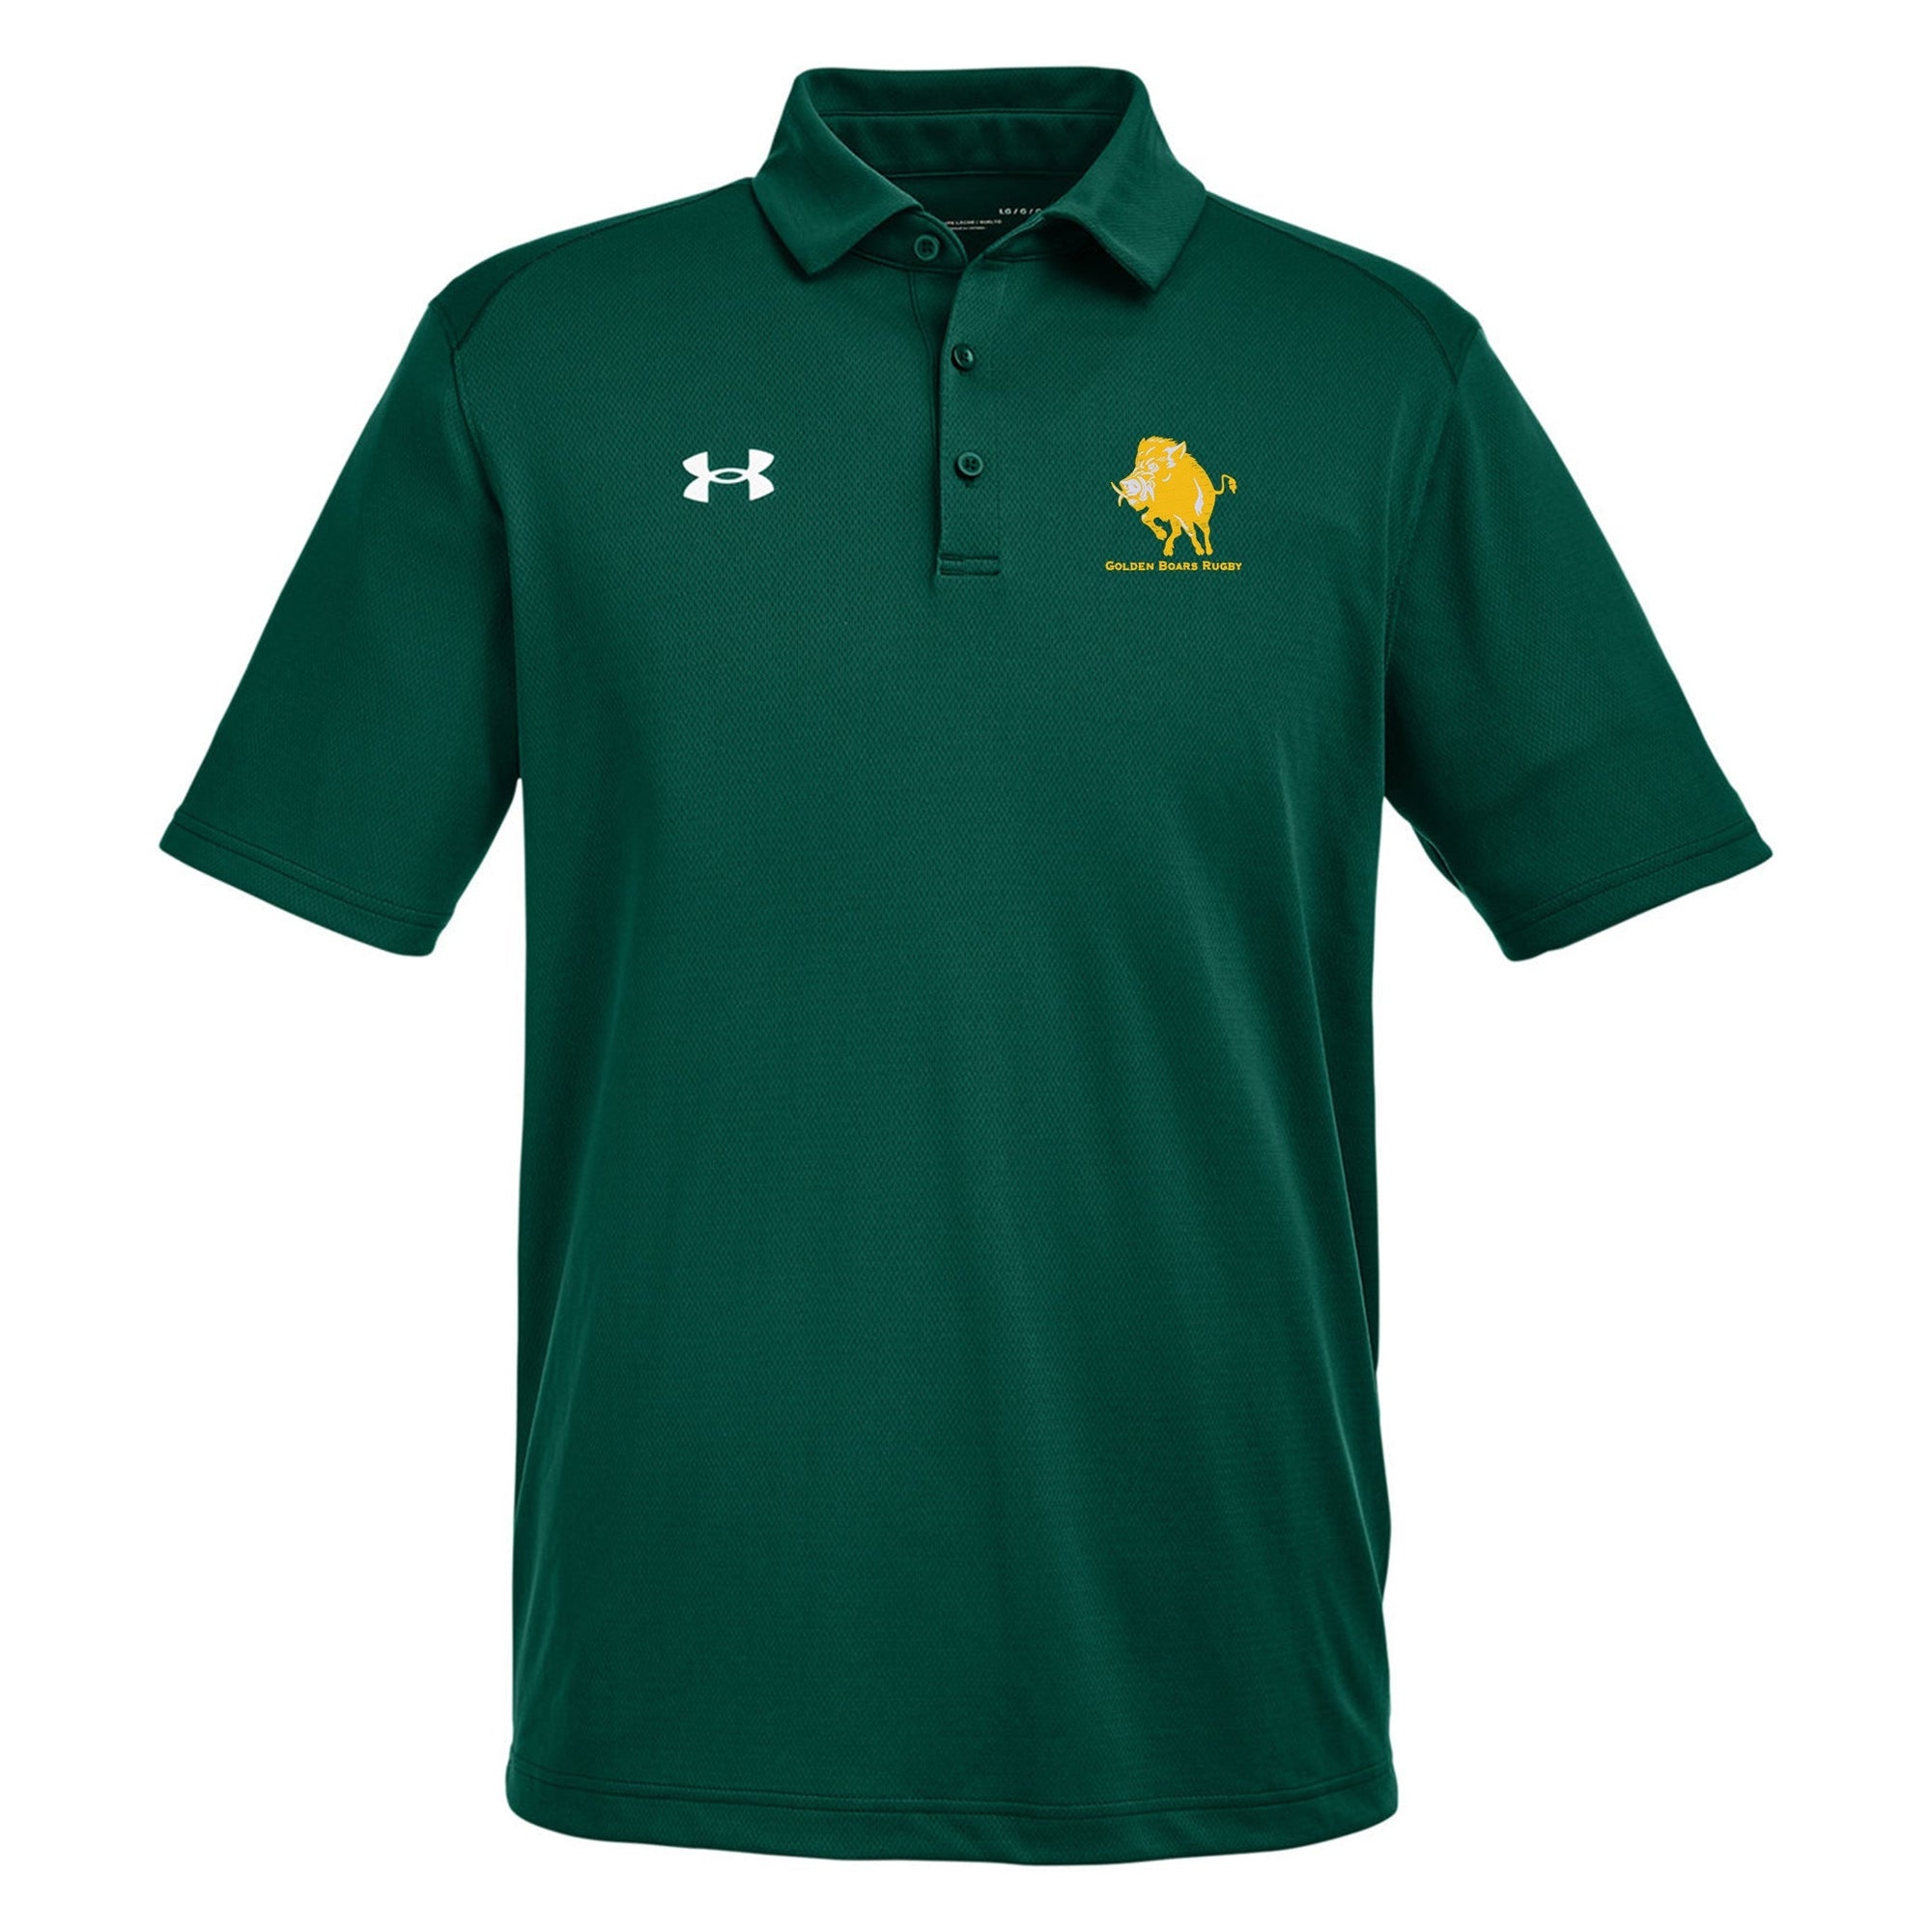 Rugby Imports Golden Boars RFC Tech Polo